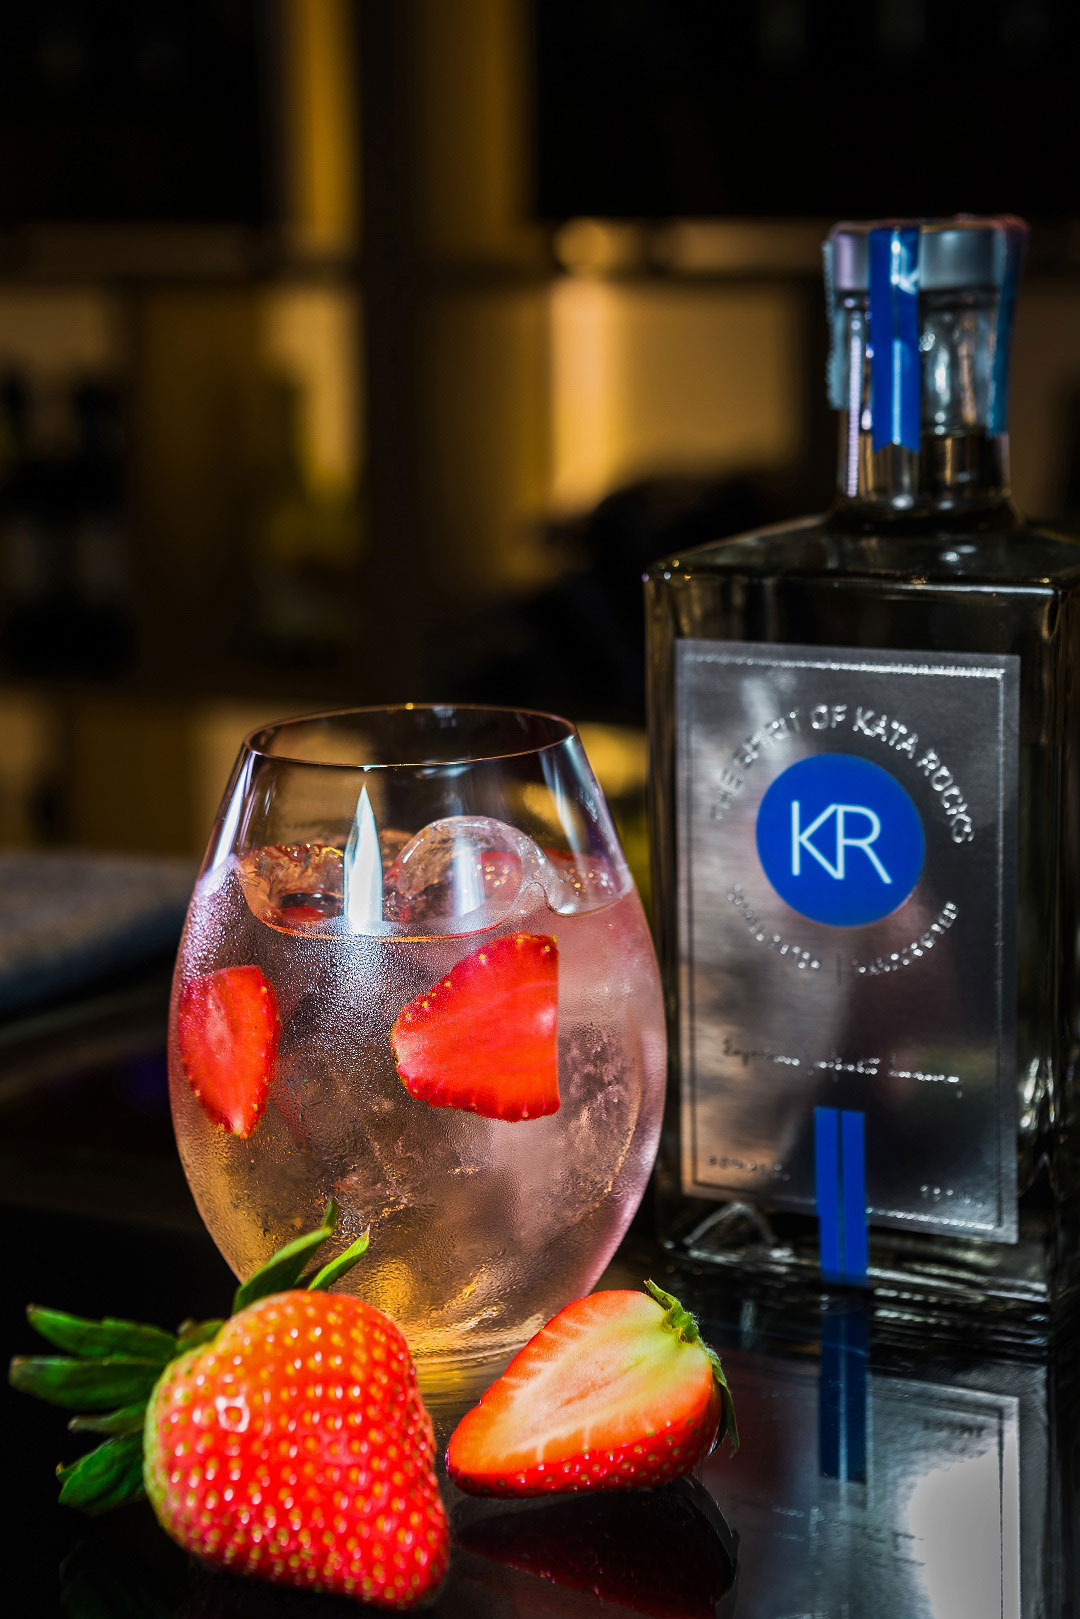 Organic Chiang Mai strawberries are featured as a natural sweetener in a Kata Rocks Gin & Tonic